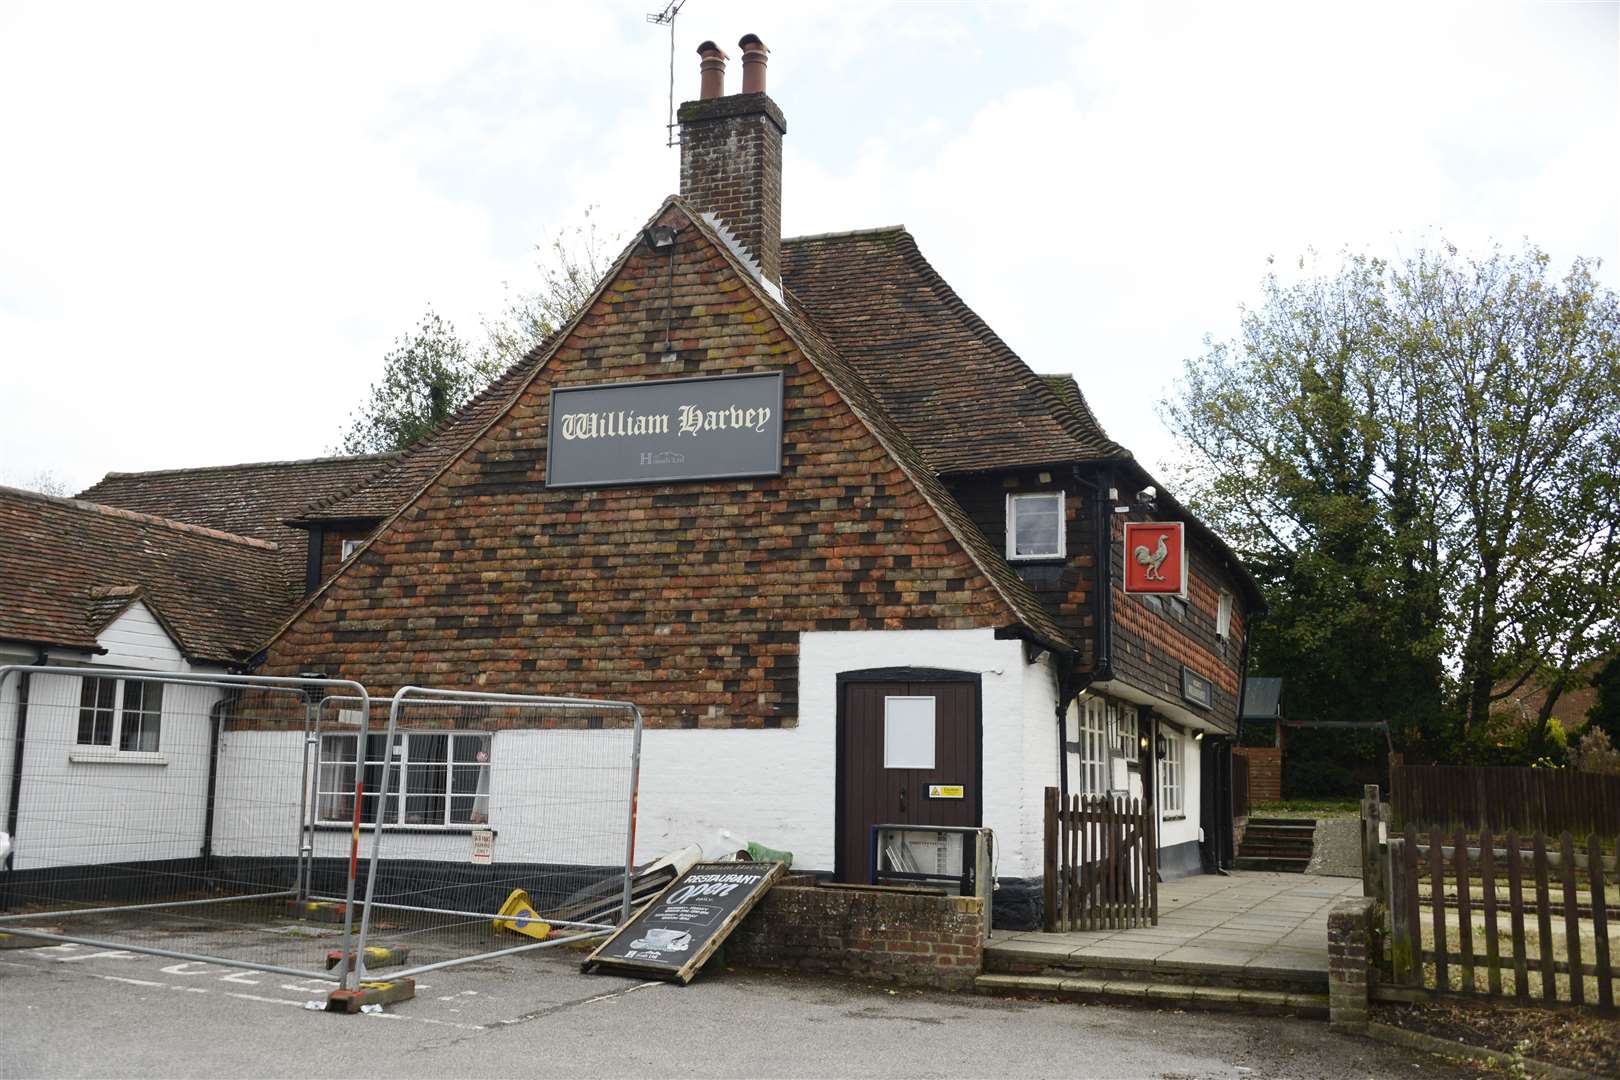 The attack took place at the William Harvey Pub on Thursday